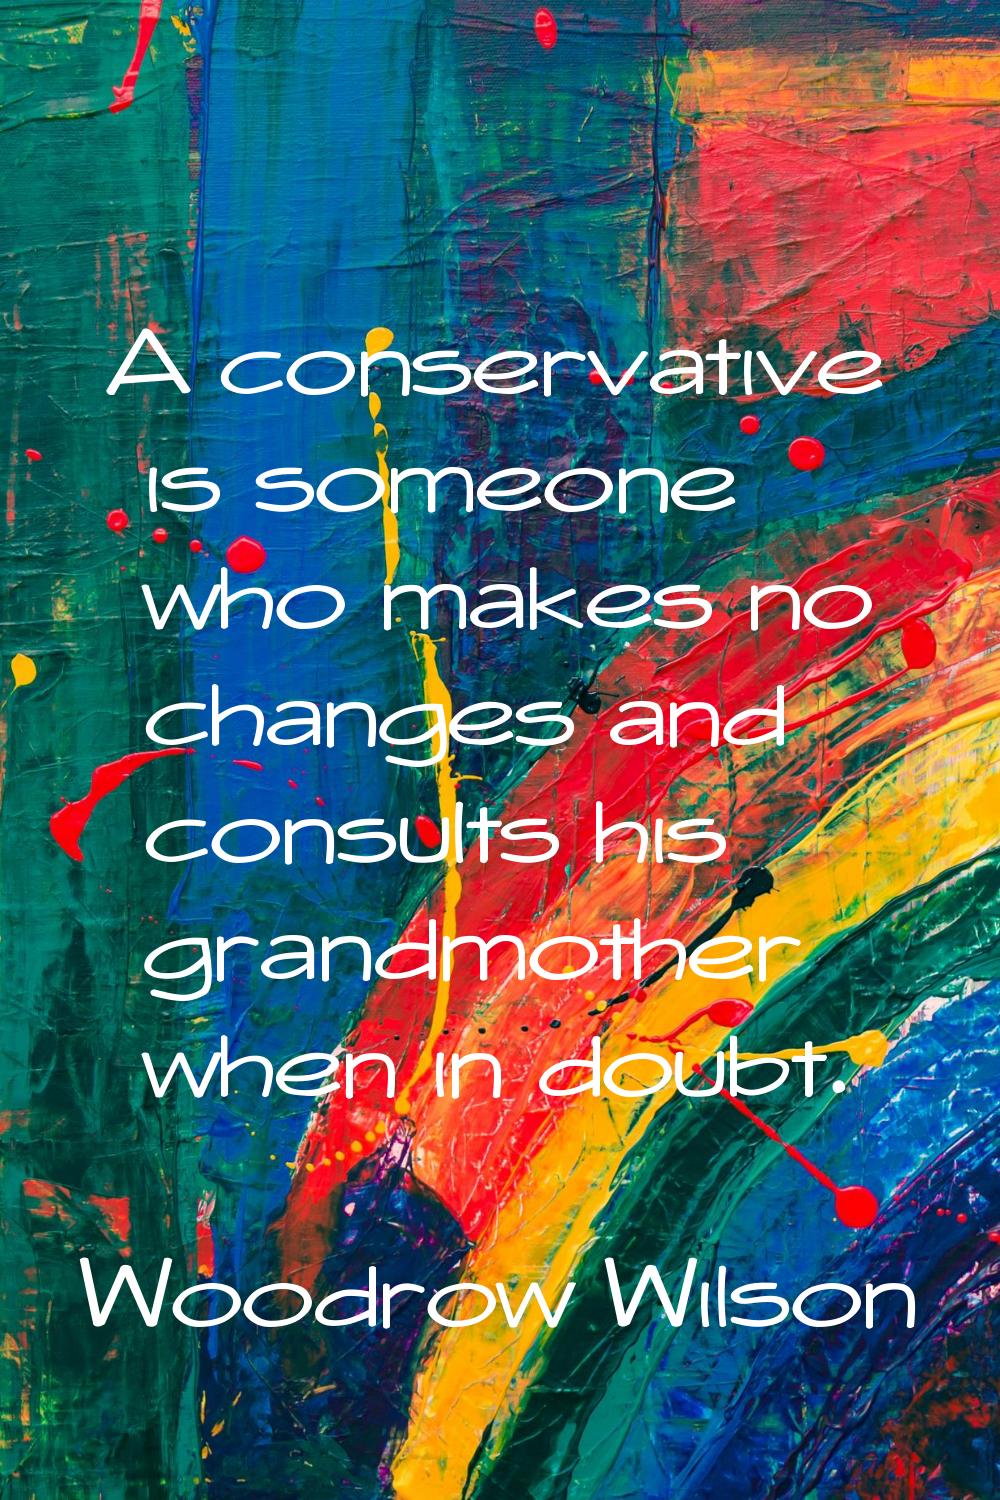 A conservative is someone who makes no changes and consults his grandmother when in doubt.